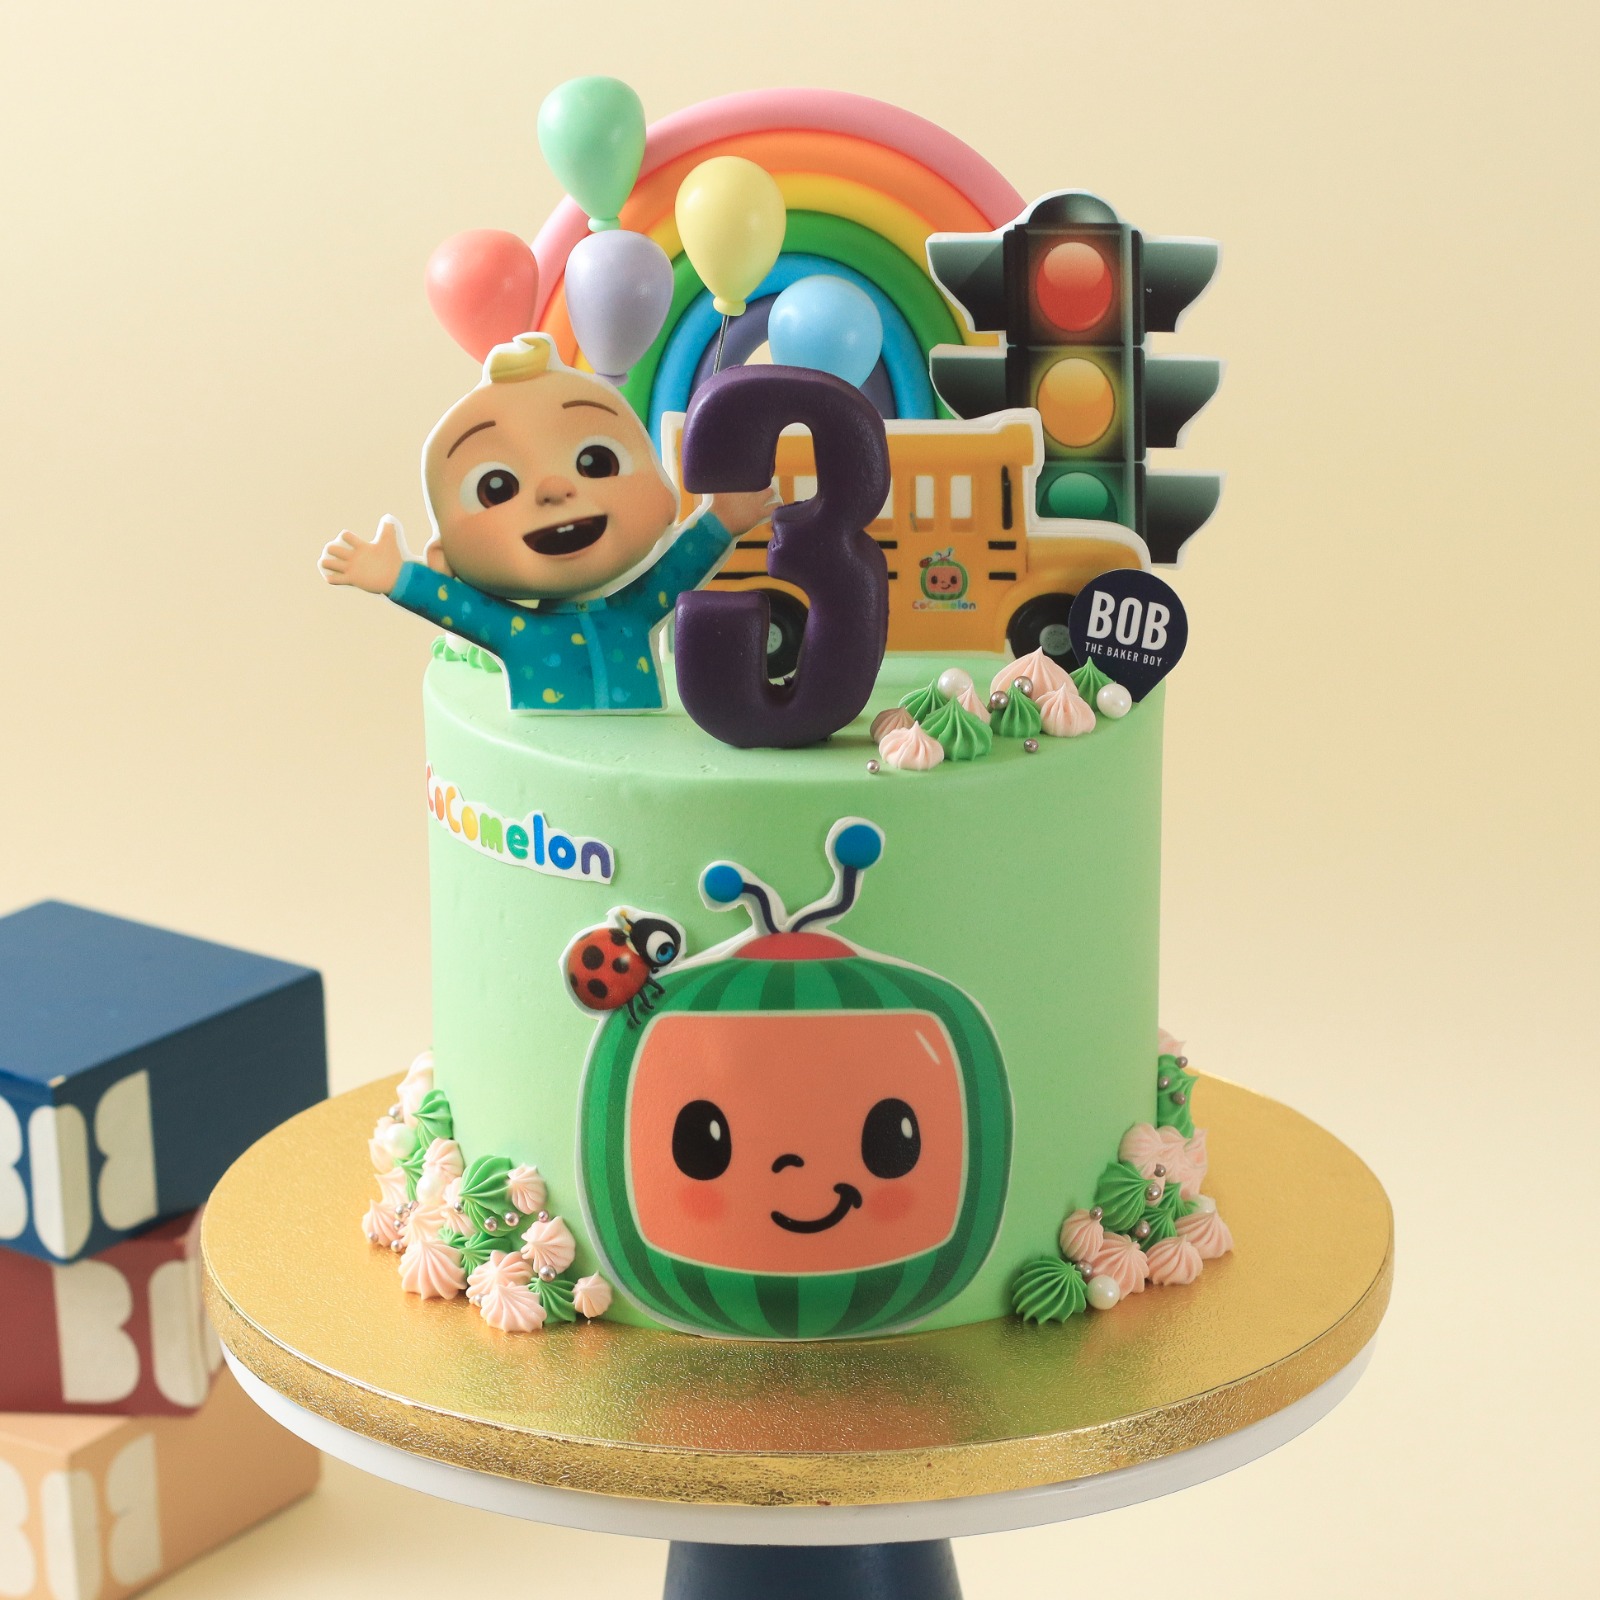 Cocomelon-Themed Birthday Cake for Kids